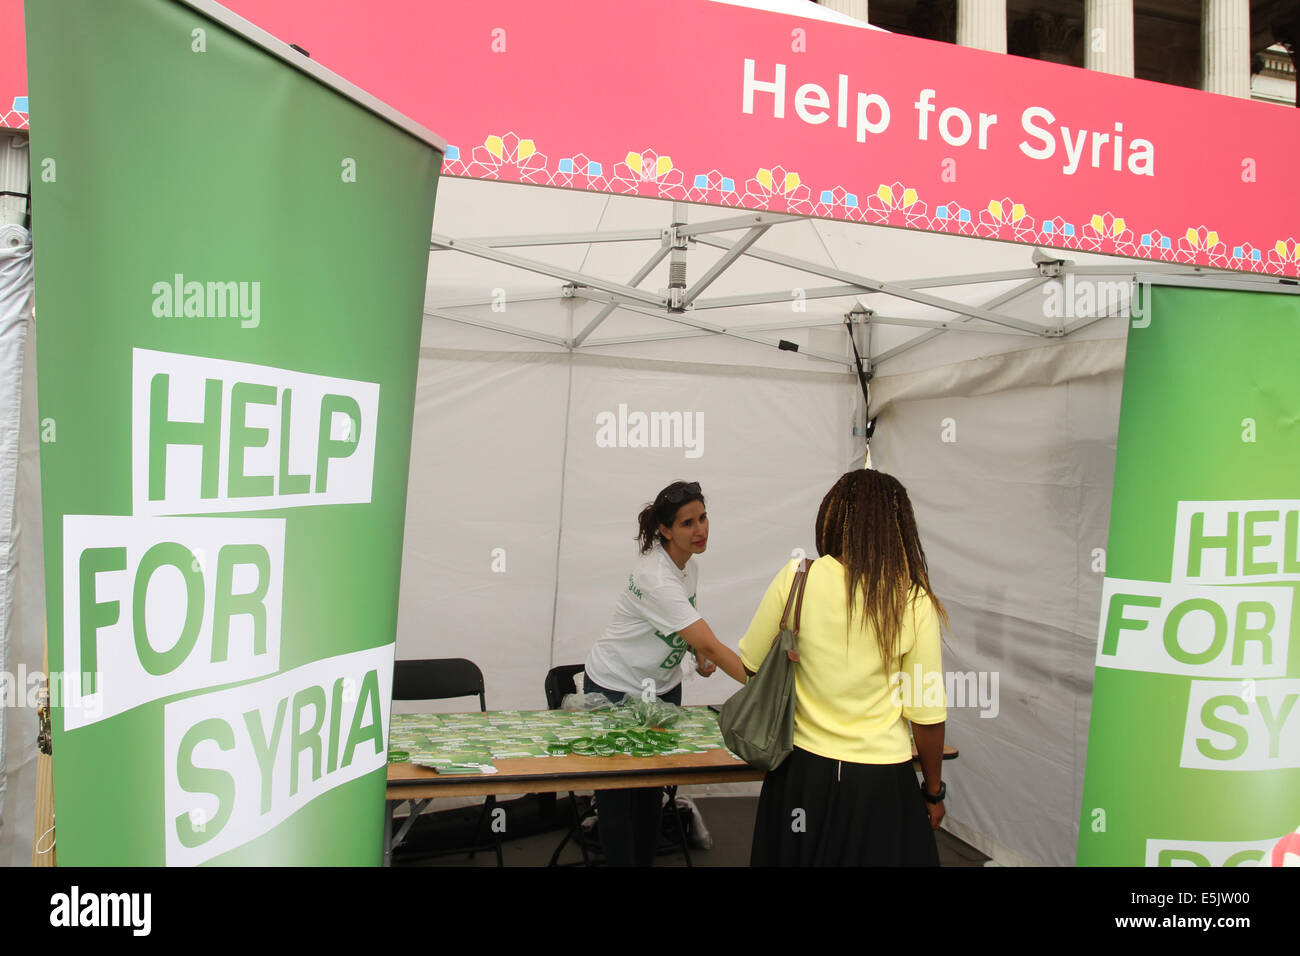 London, UK 2 August 2014.  The Help for Syria stall at Trafalgar Square.The Eid Festival event sponsored by the Mayor of London and partnered by Lebara mobile, Zee Entertainment, Malaysia Kitchen amongst others. Stock Photo